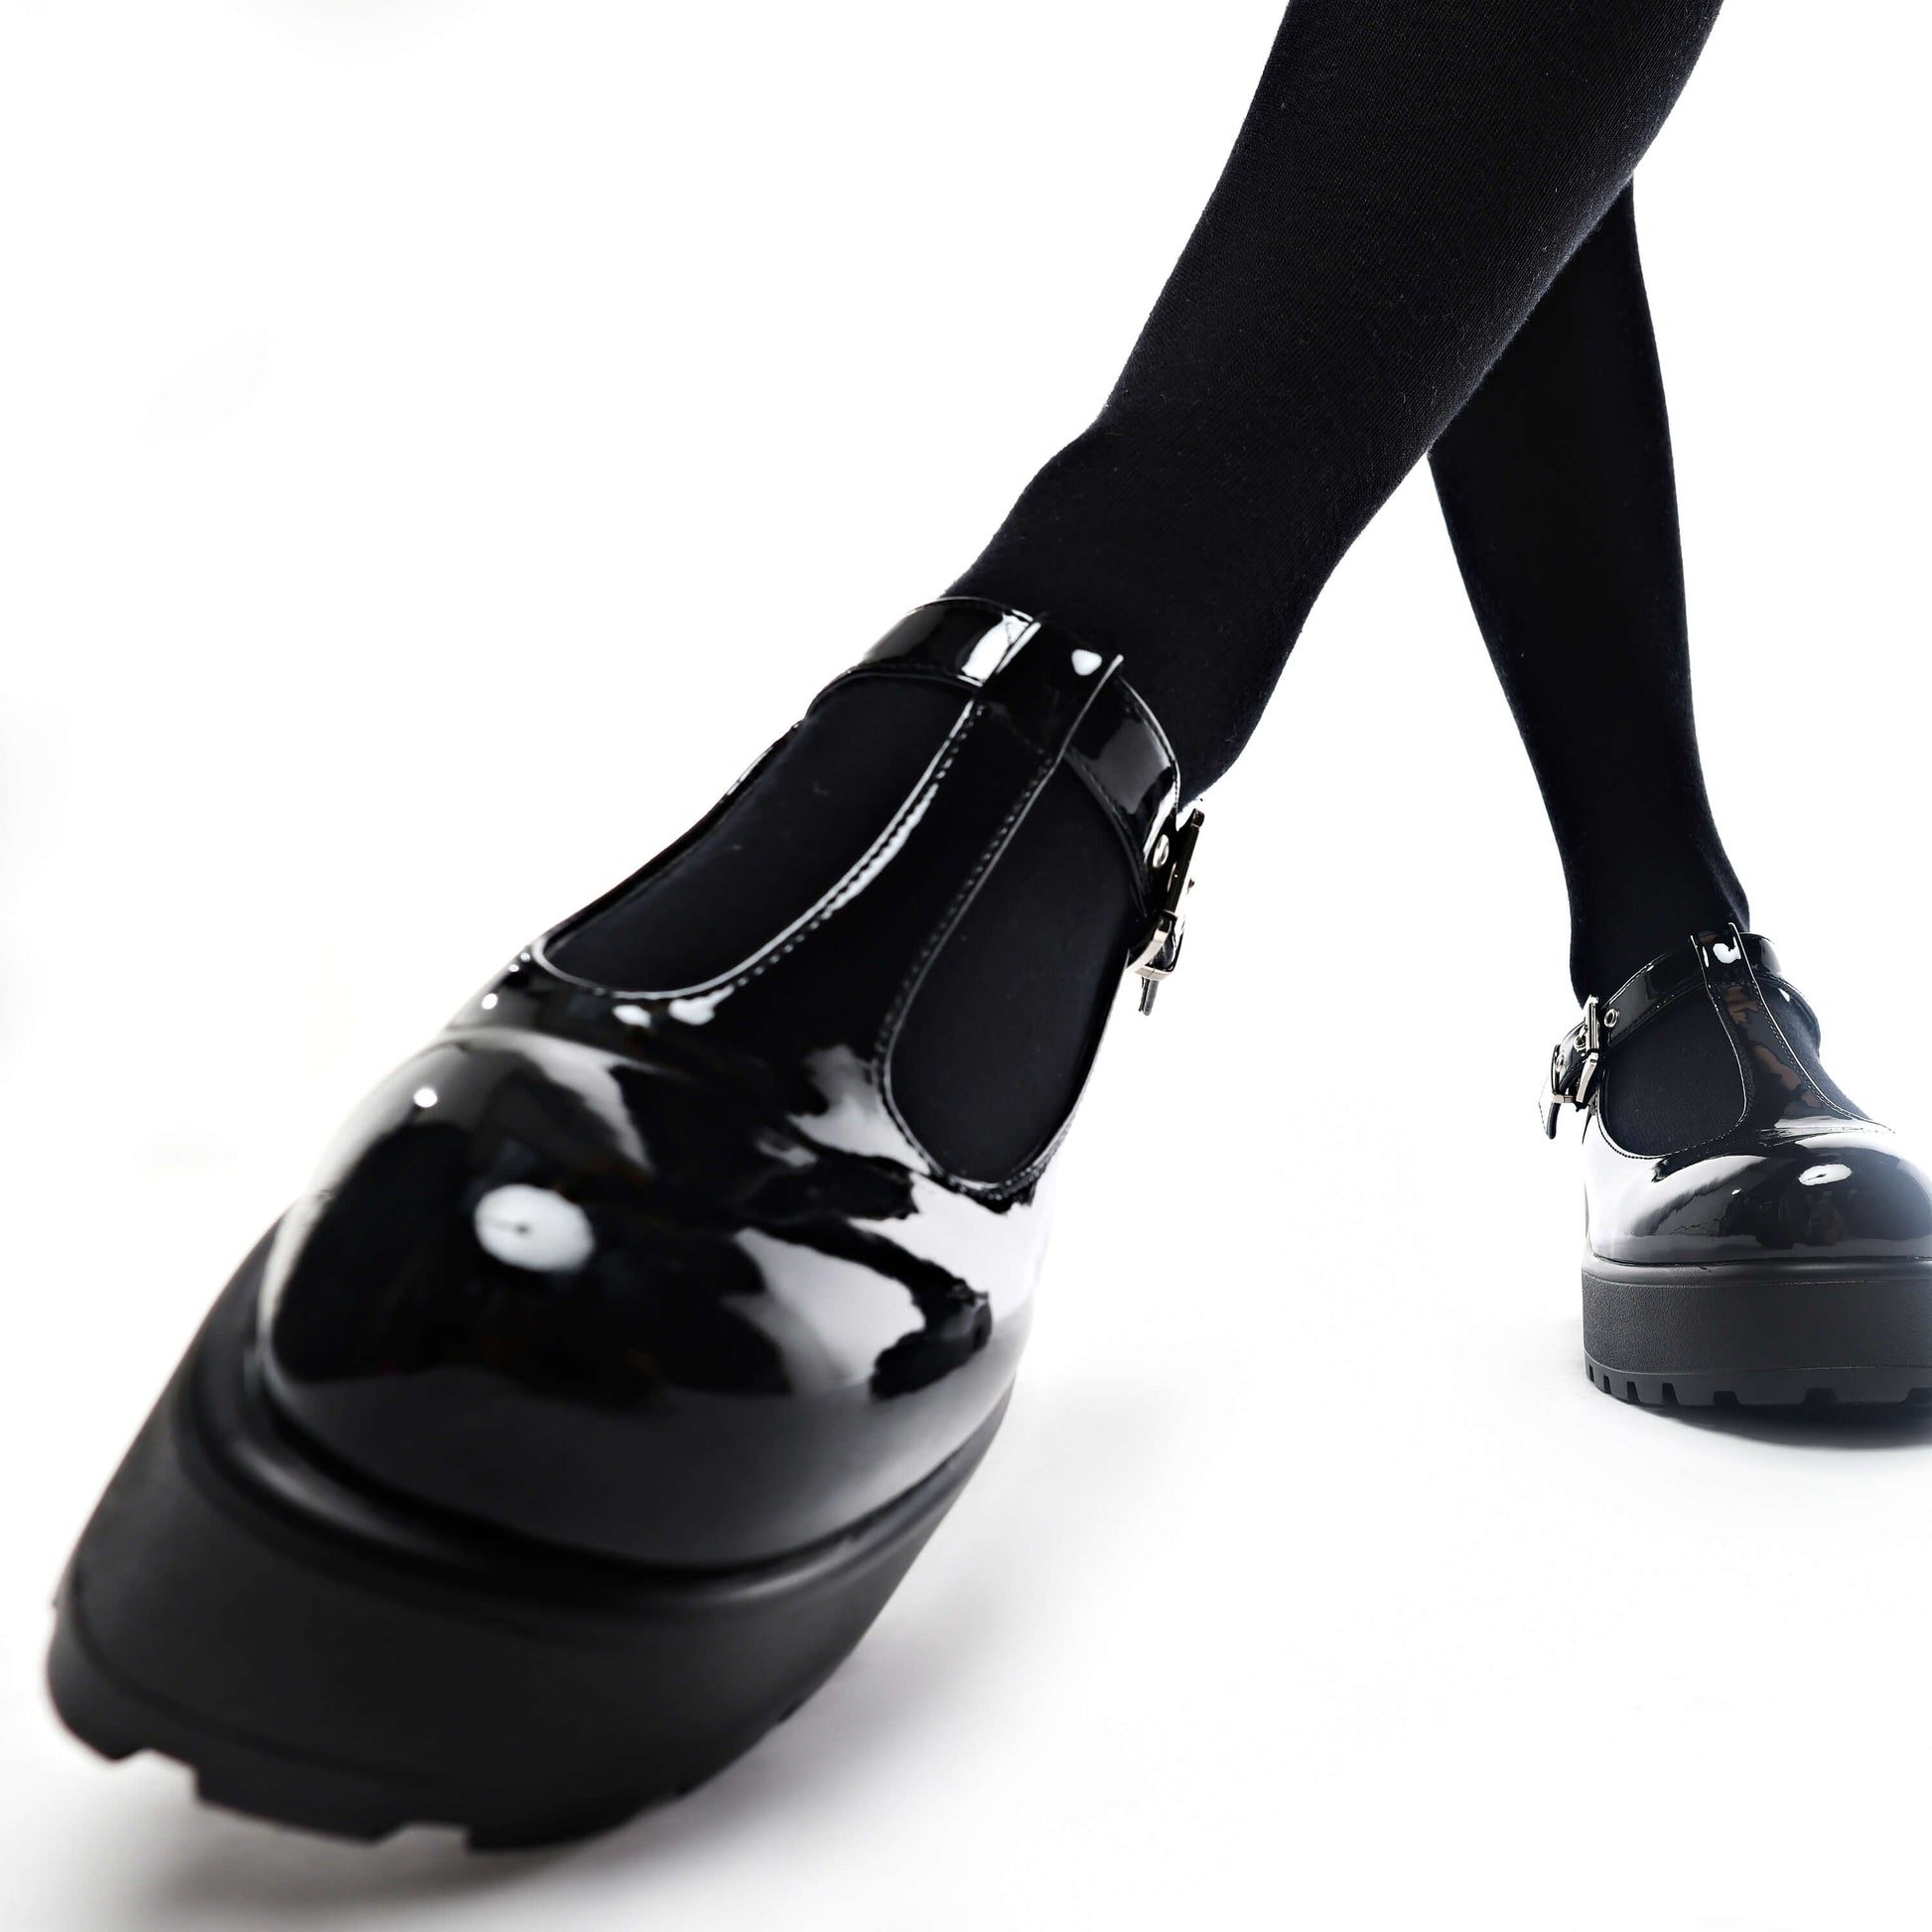 SAI Black Mary Jane Shoes 'Patent Edition' - Mary Janes - KOI Footwear - Black - Front View